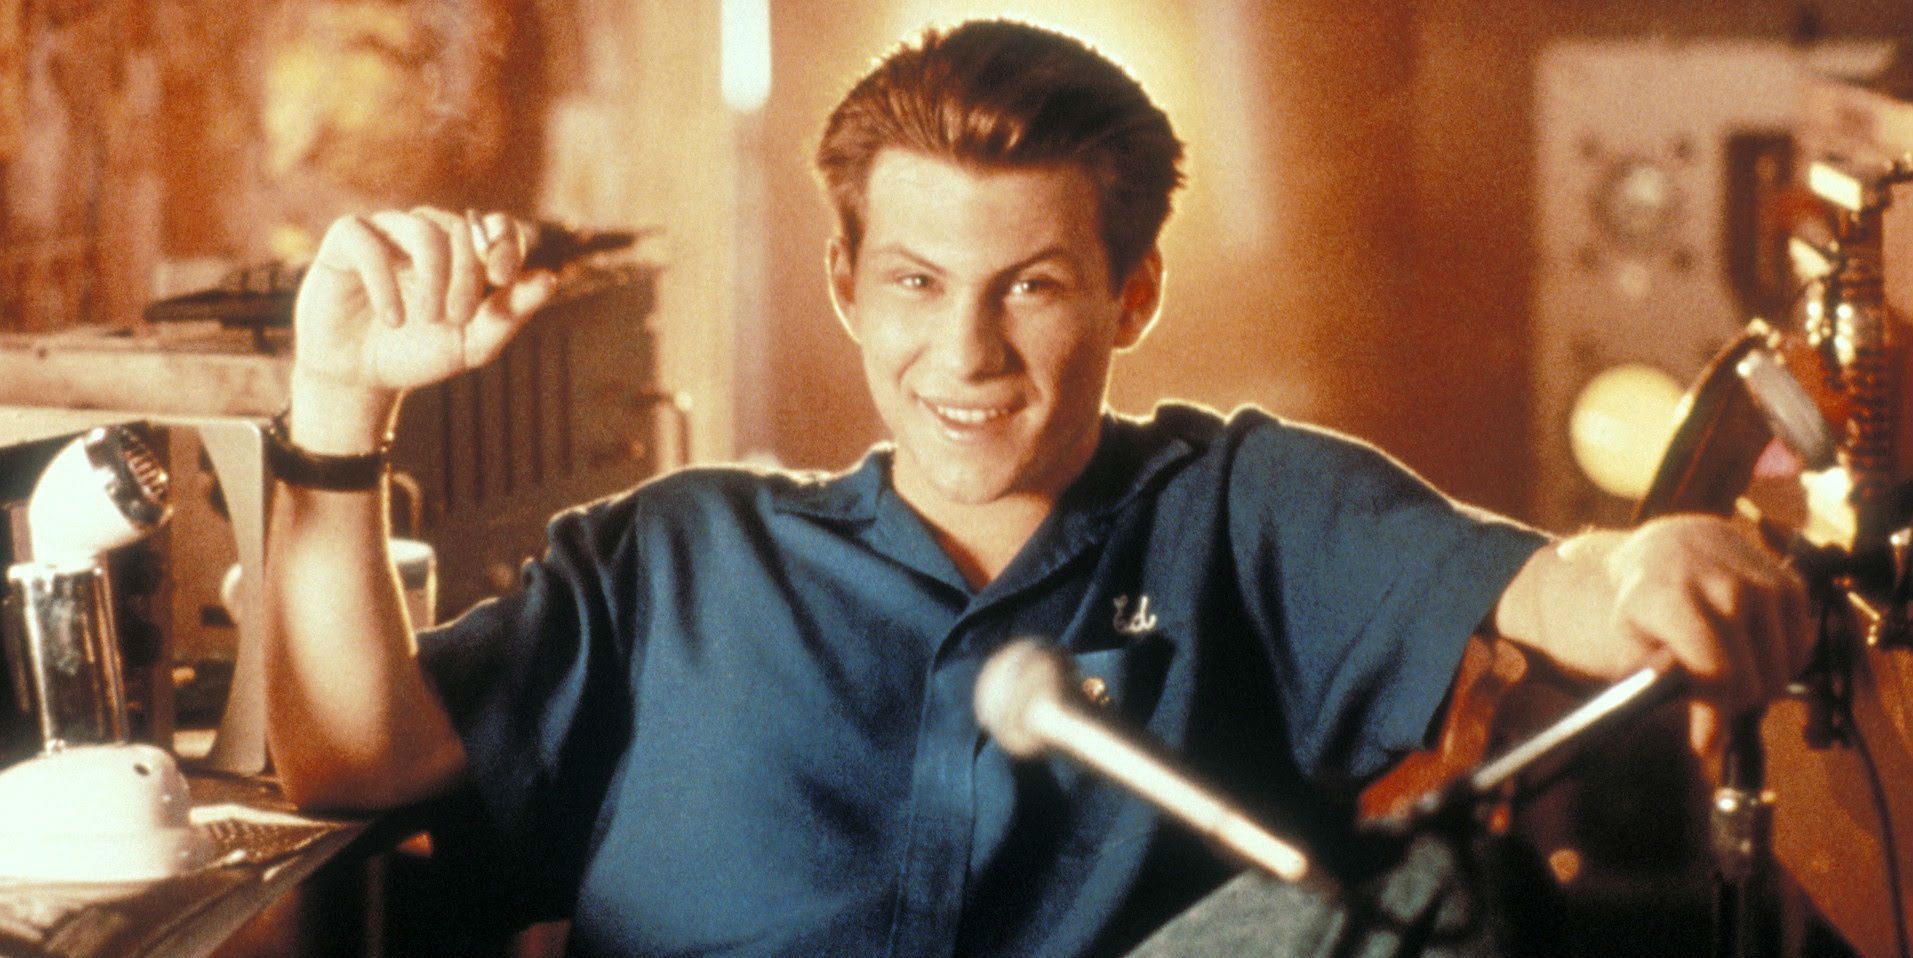 Christian Slater in Pump Up the Volume